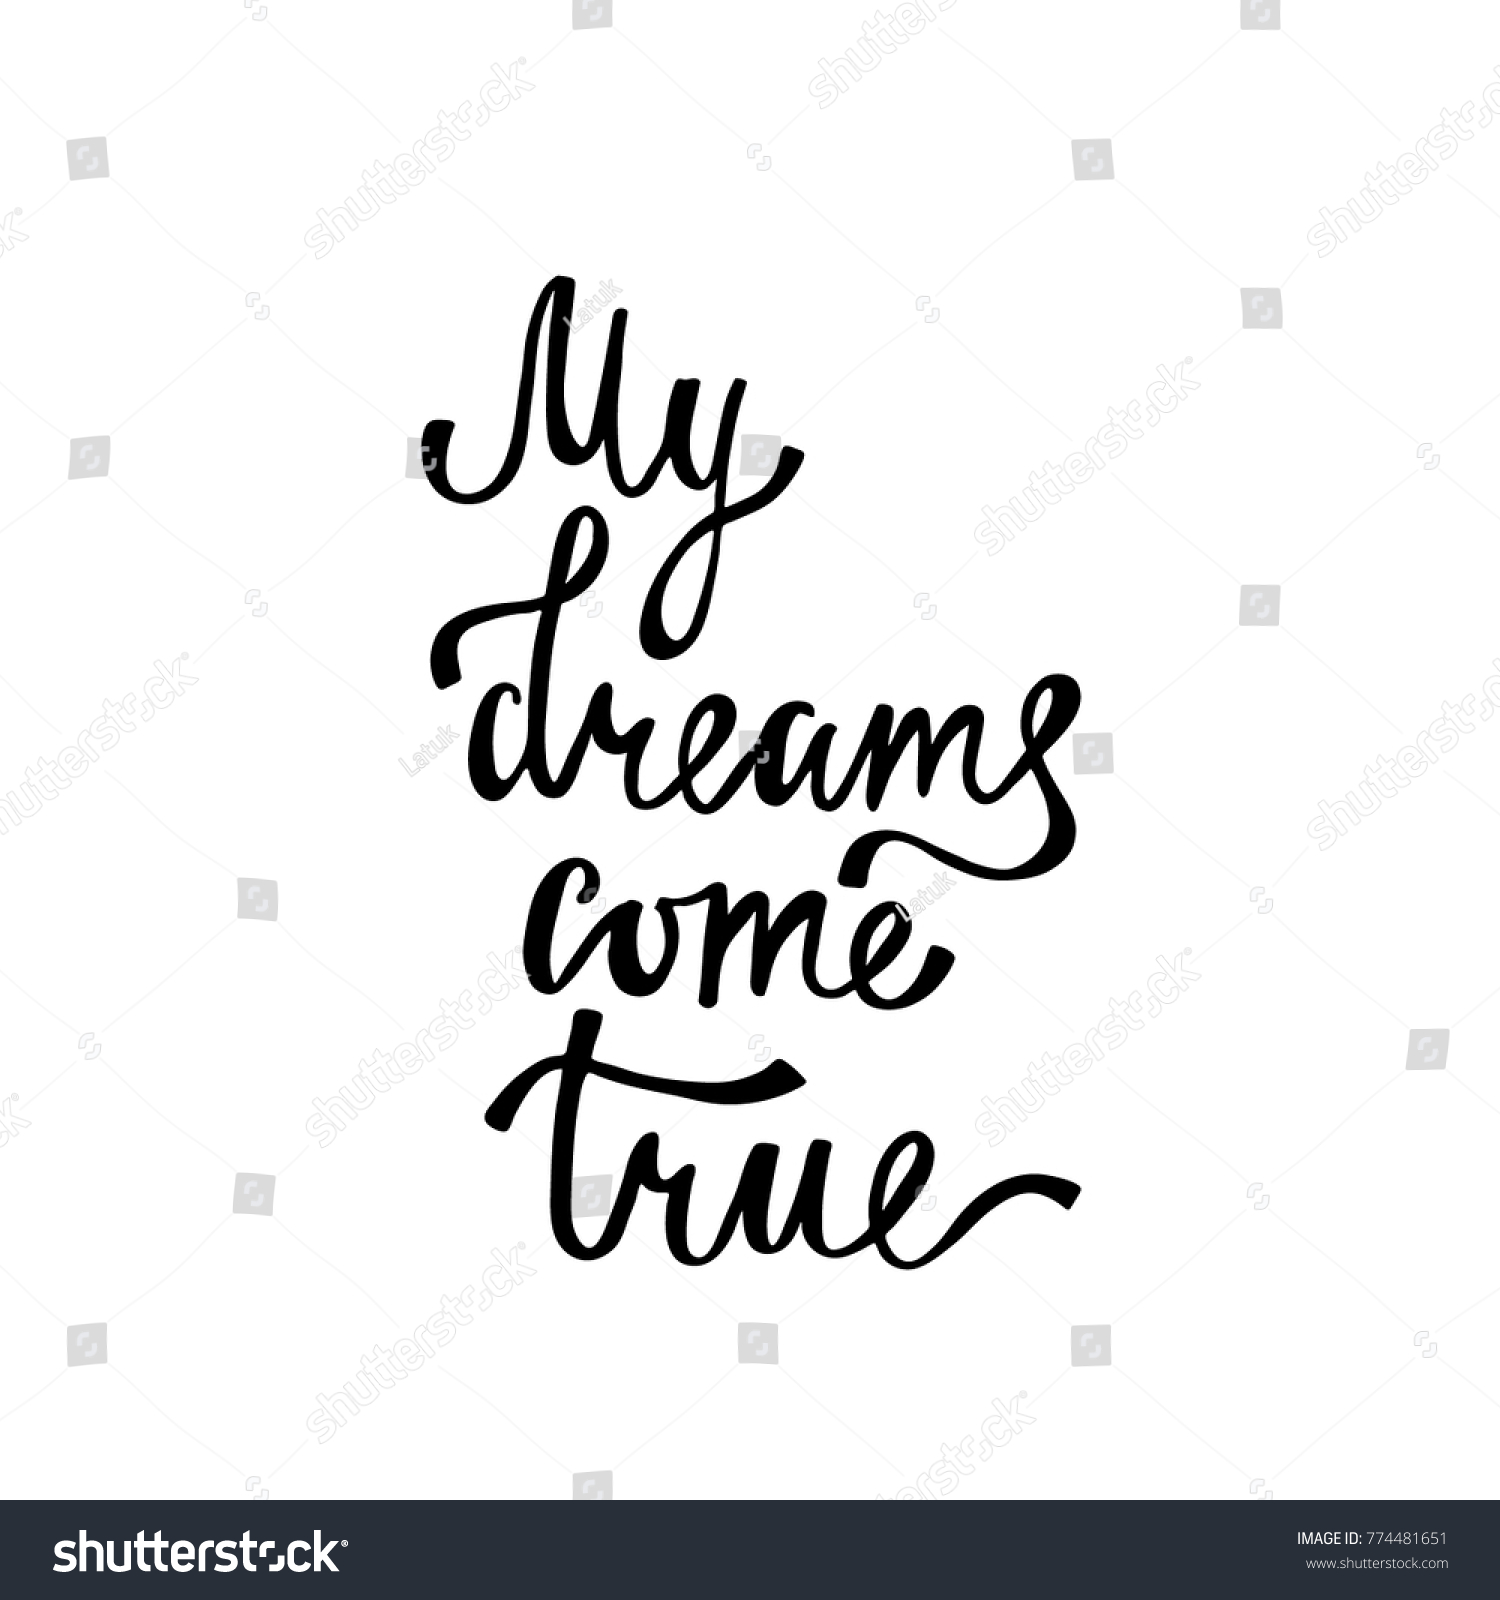 My Dreams Come True Inspirational Calligraphy Stock Vector (Royalty Free)  774481651